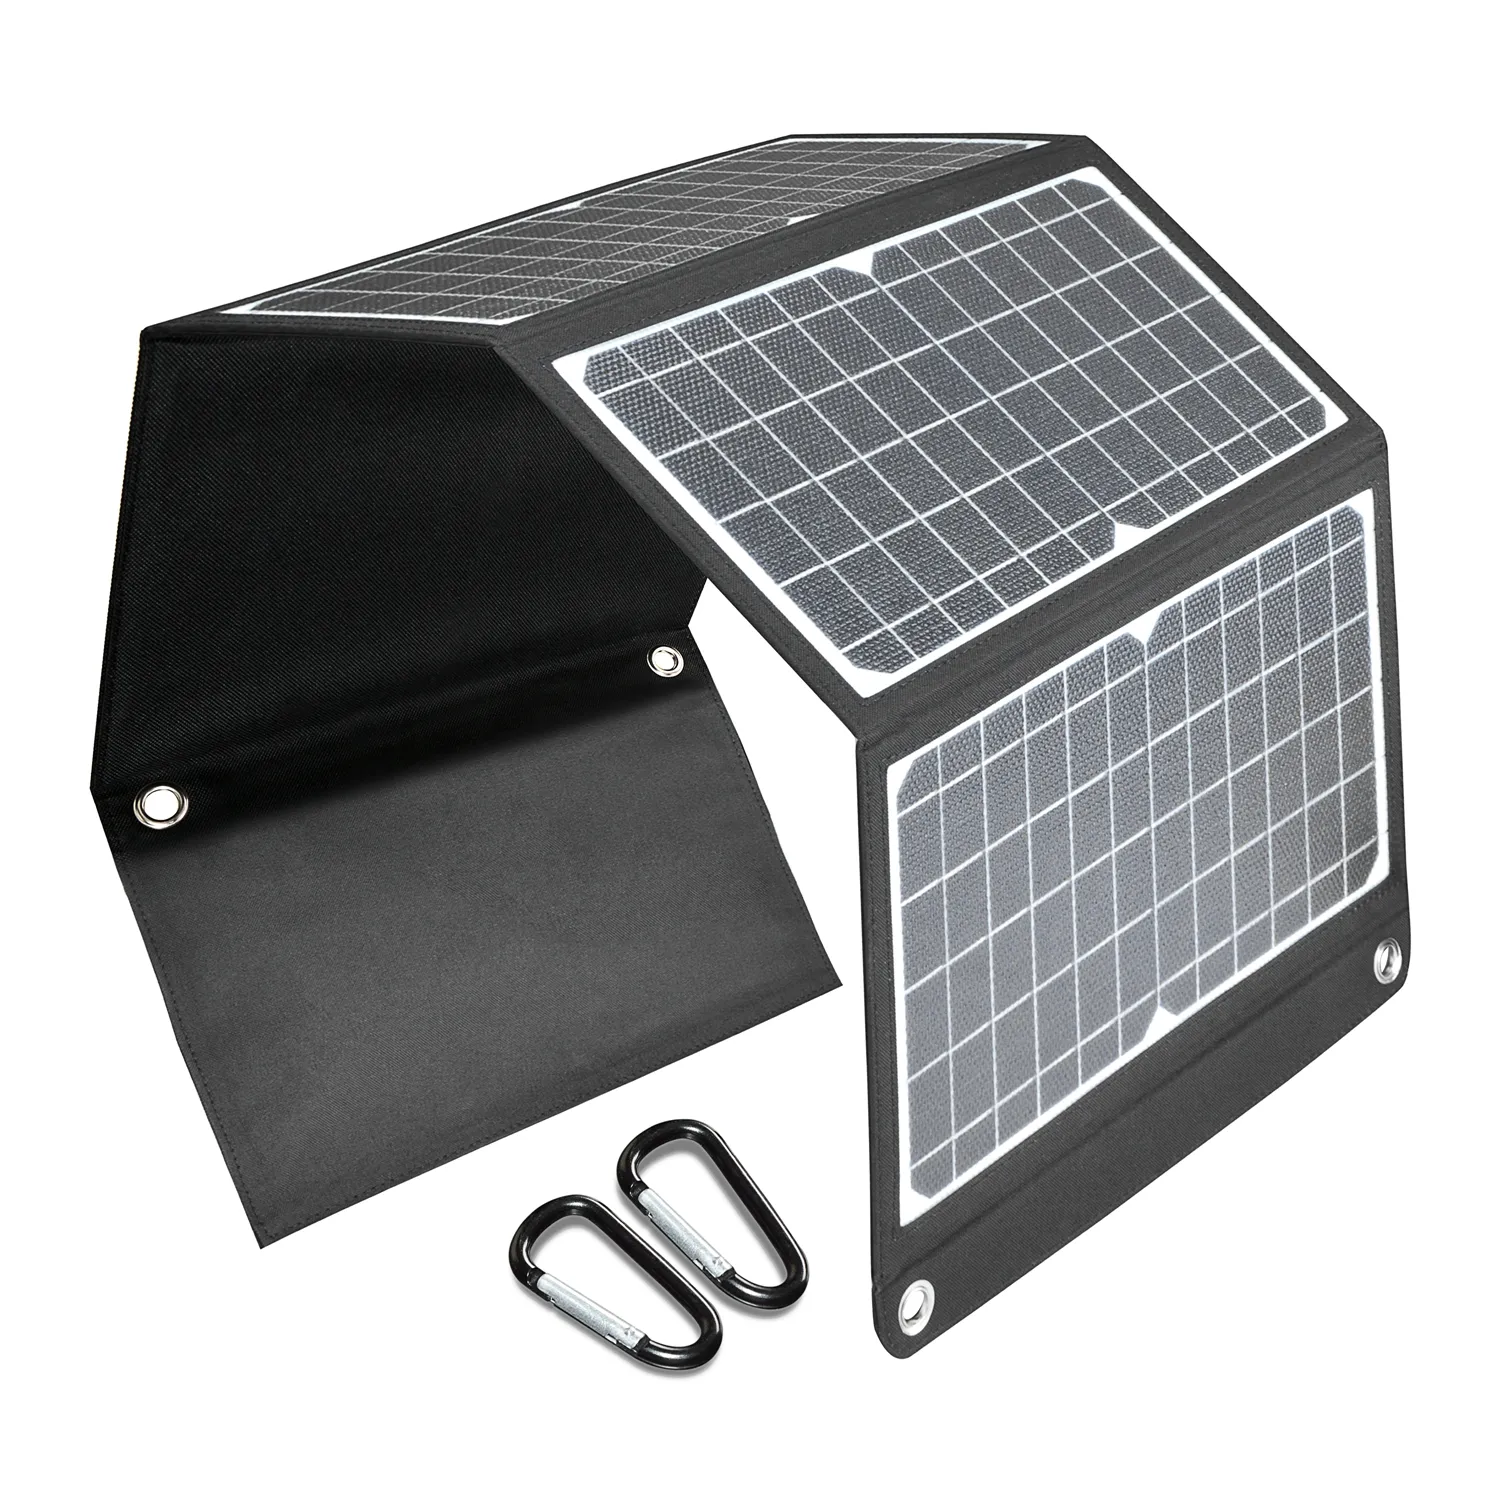 21W Foldable Fabric backpack Sunpower Solar Cell Portable Charger USB Solar Panel for Bags